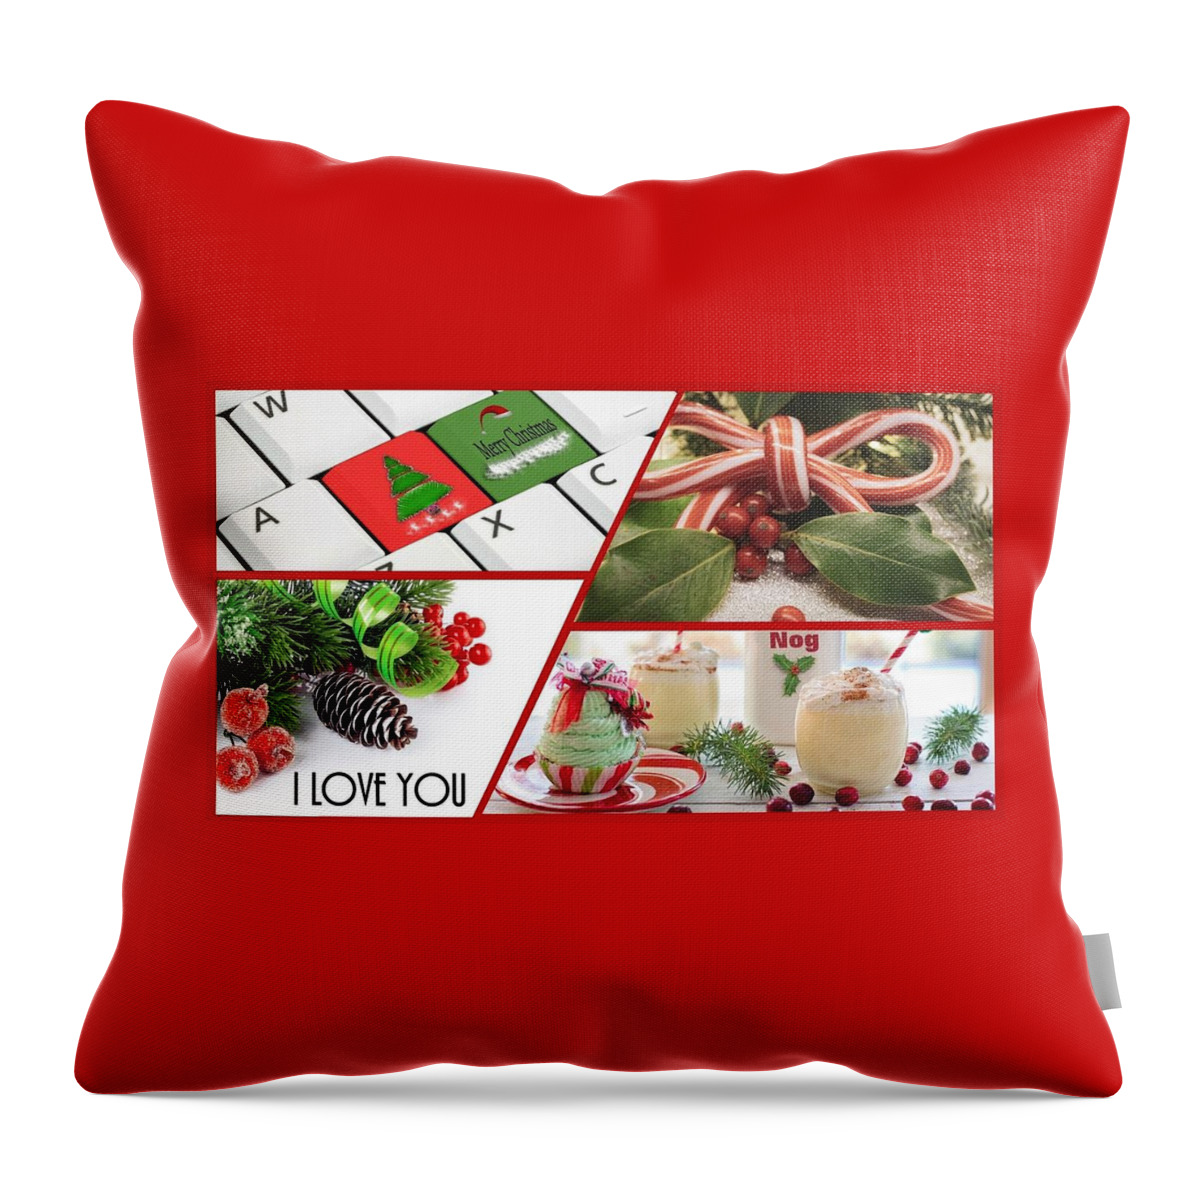 Love Throw Pillow featuring the photograph Christmas Sweets I Love You by Nancy Ayanna Wyatt